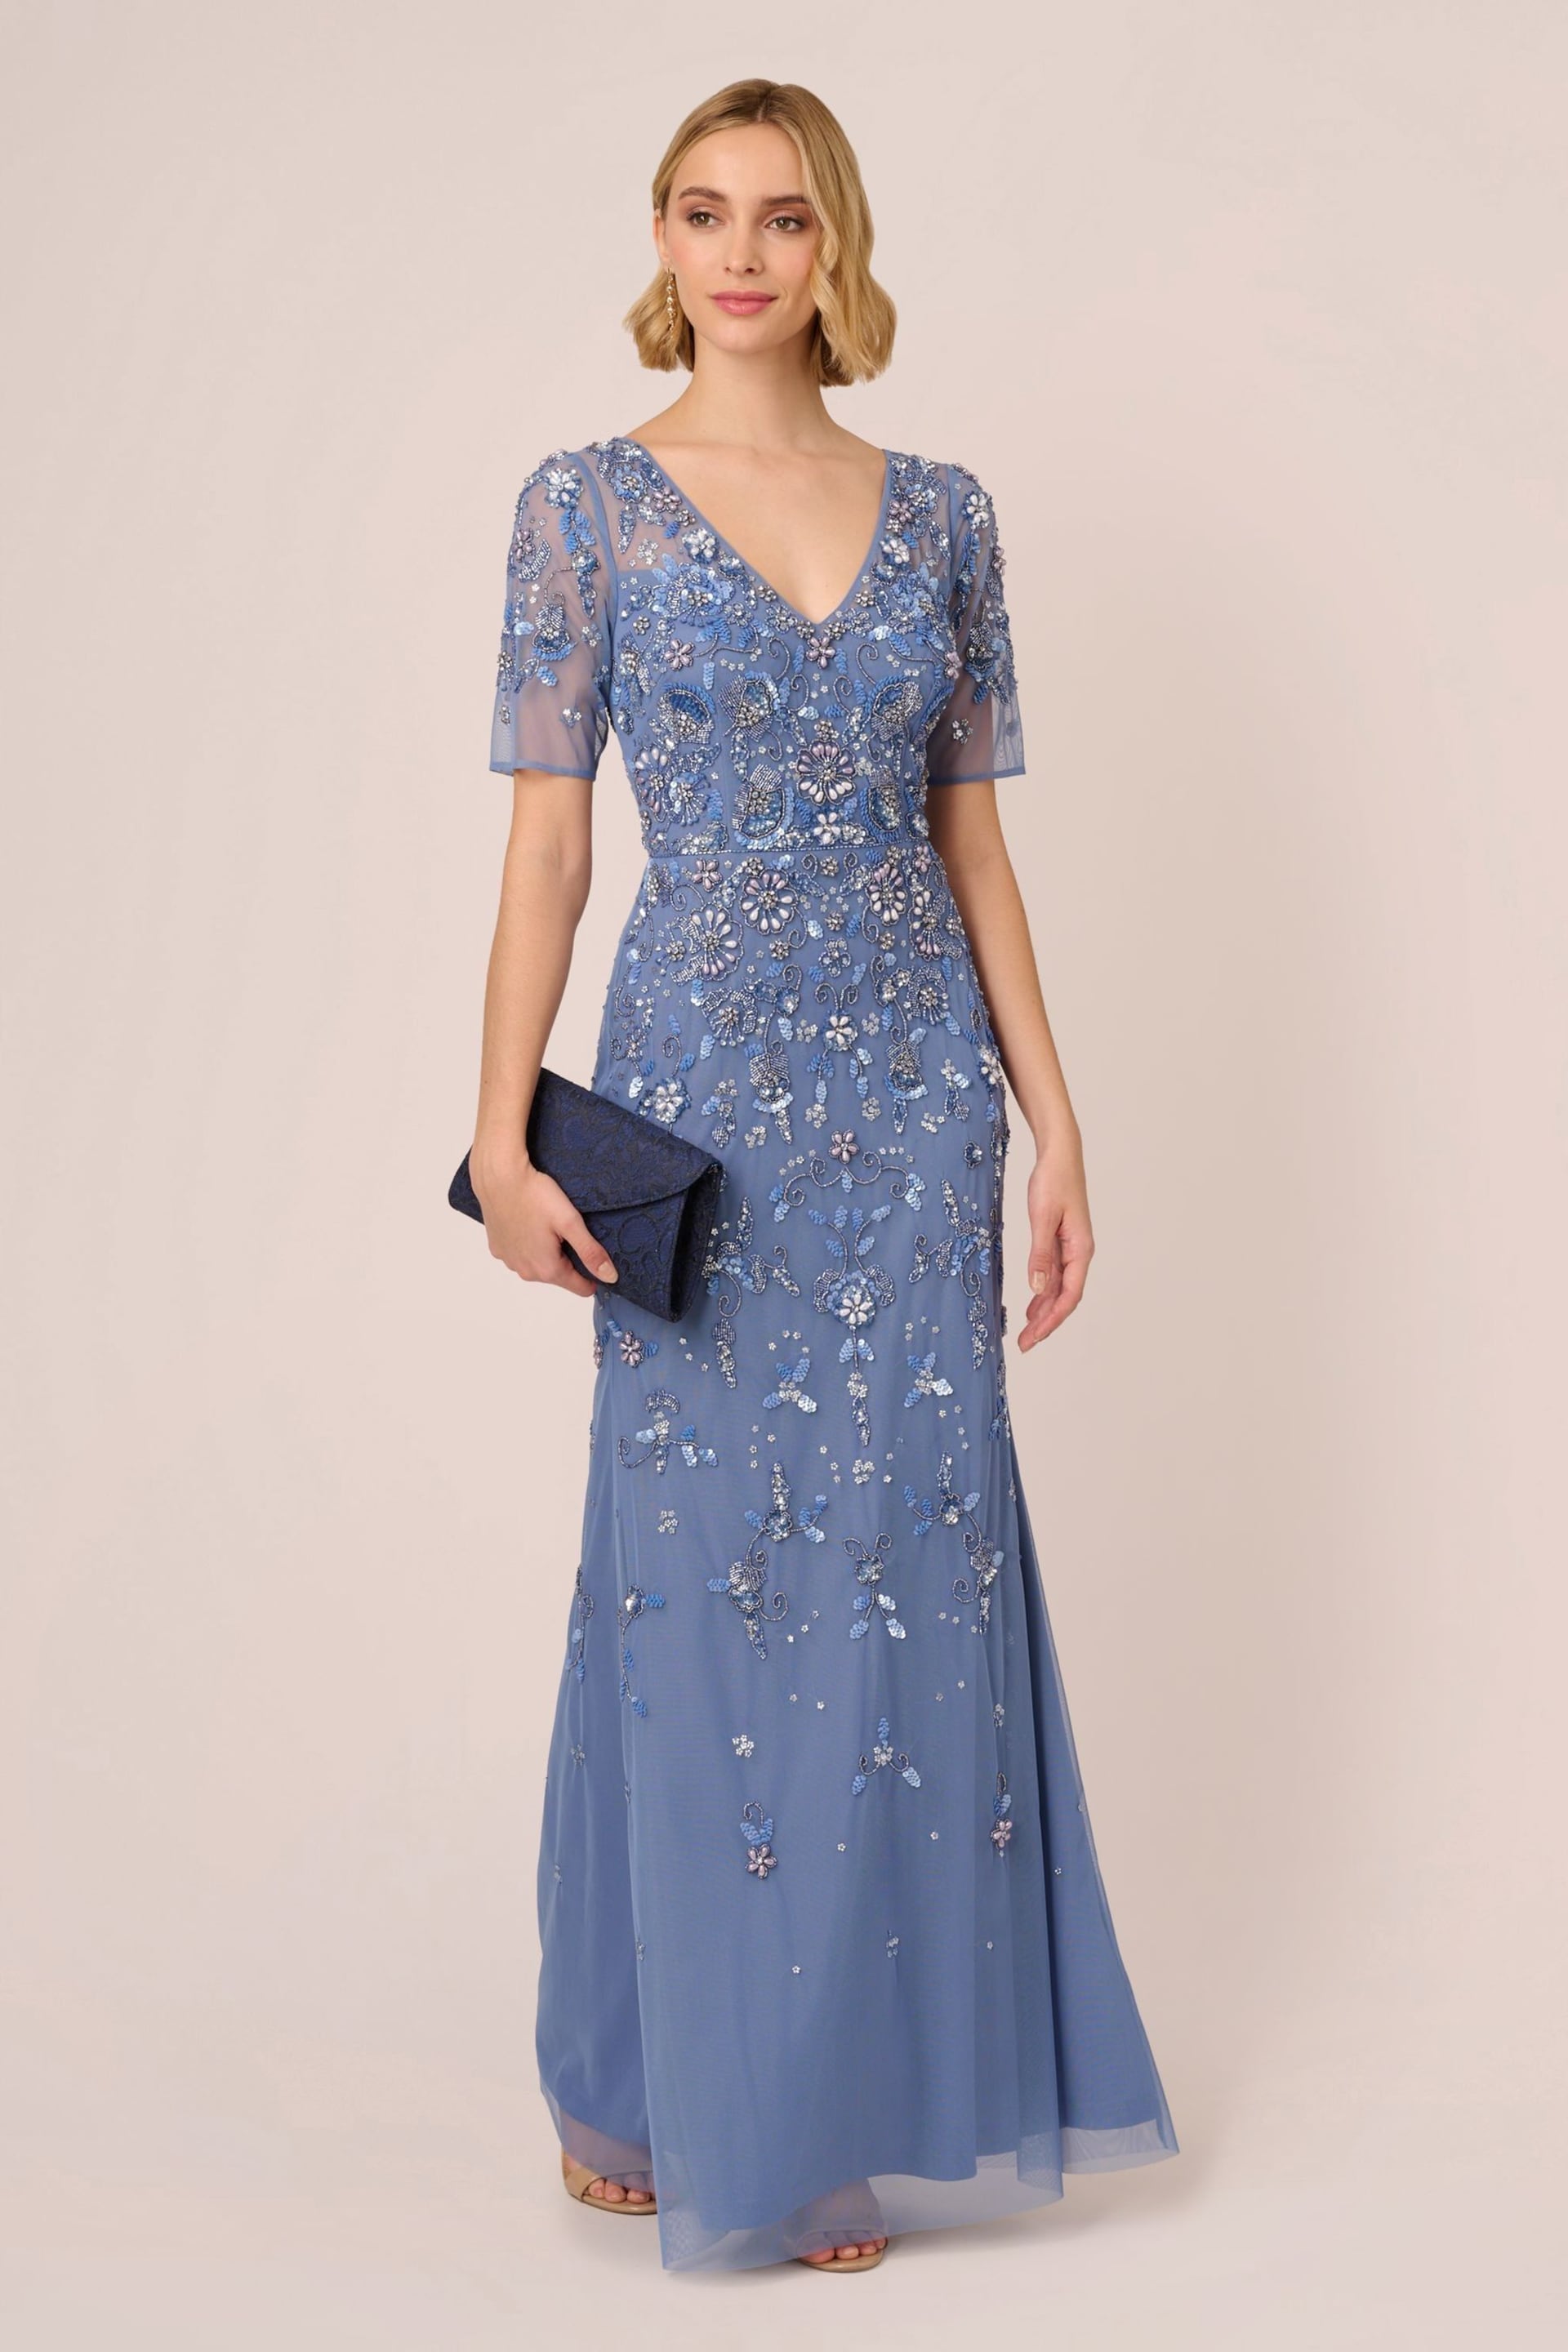 Adrianna Papell Blue Beaded Mesh Long Dress - Image 3 of 7